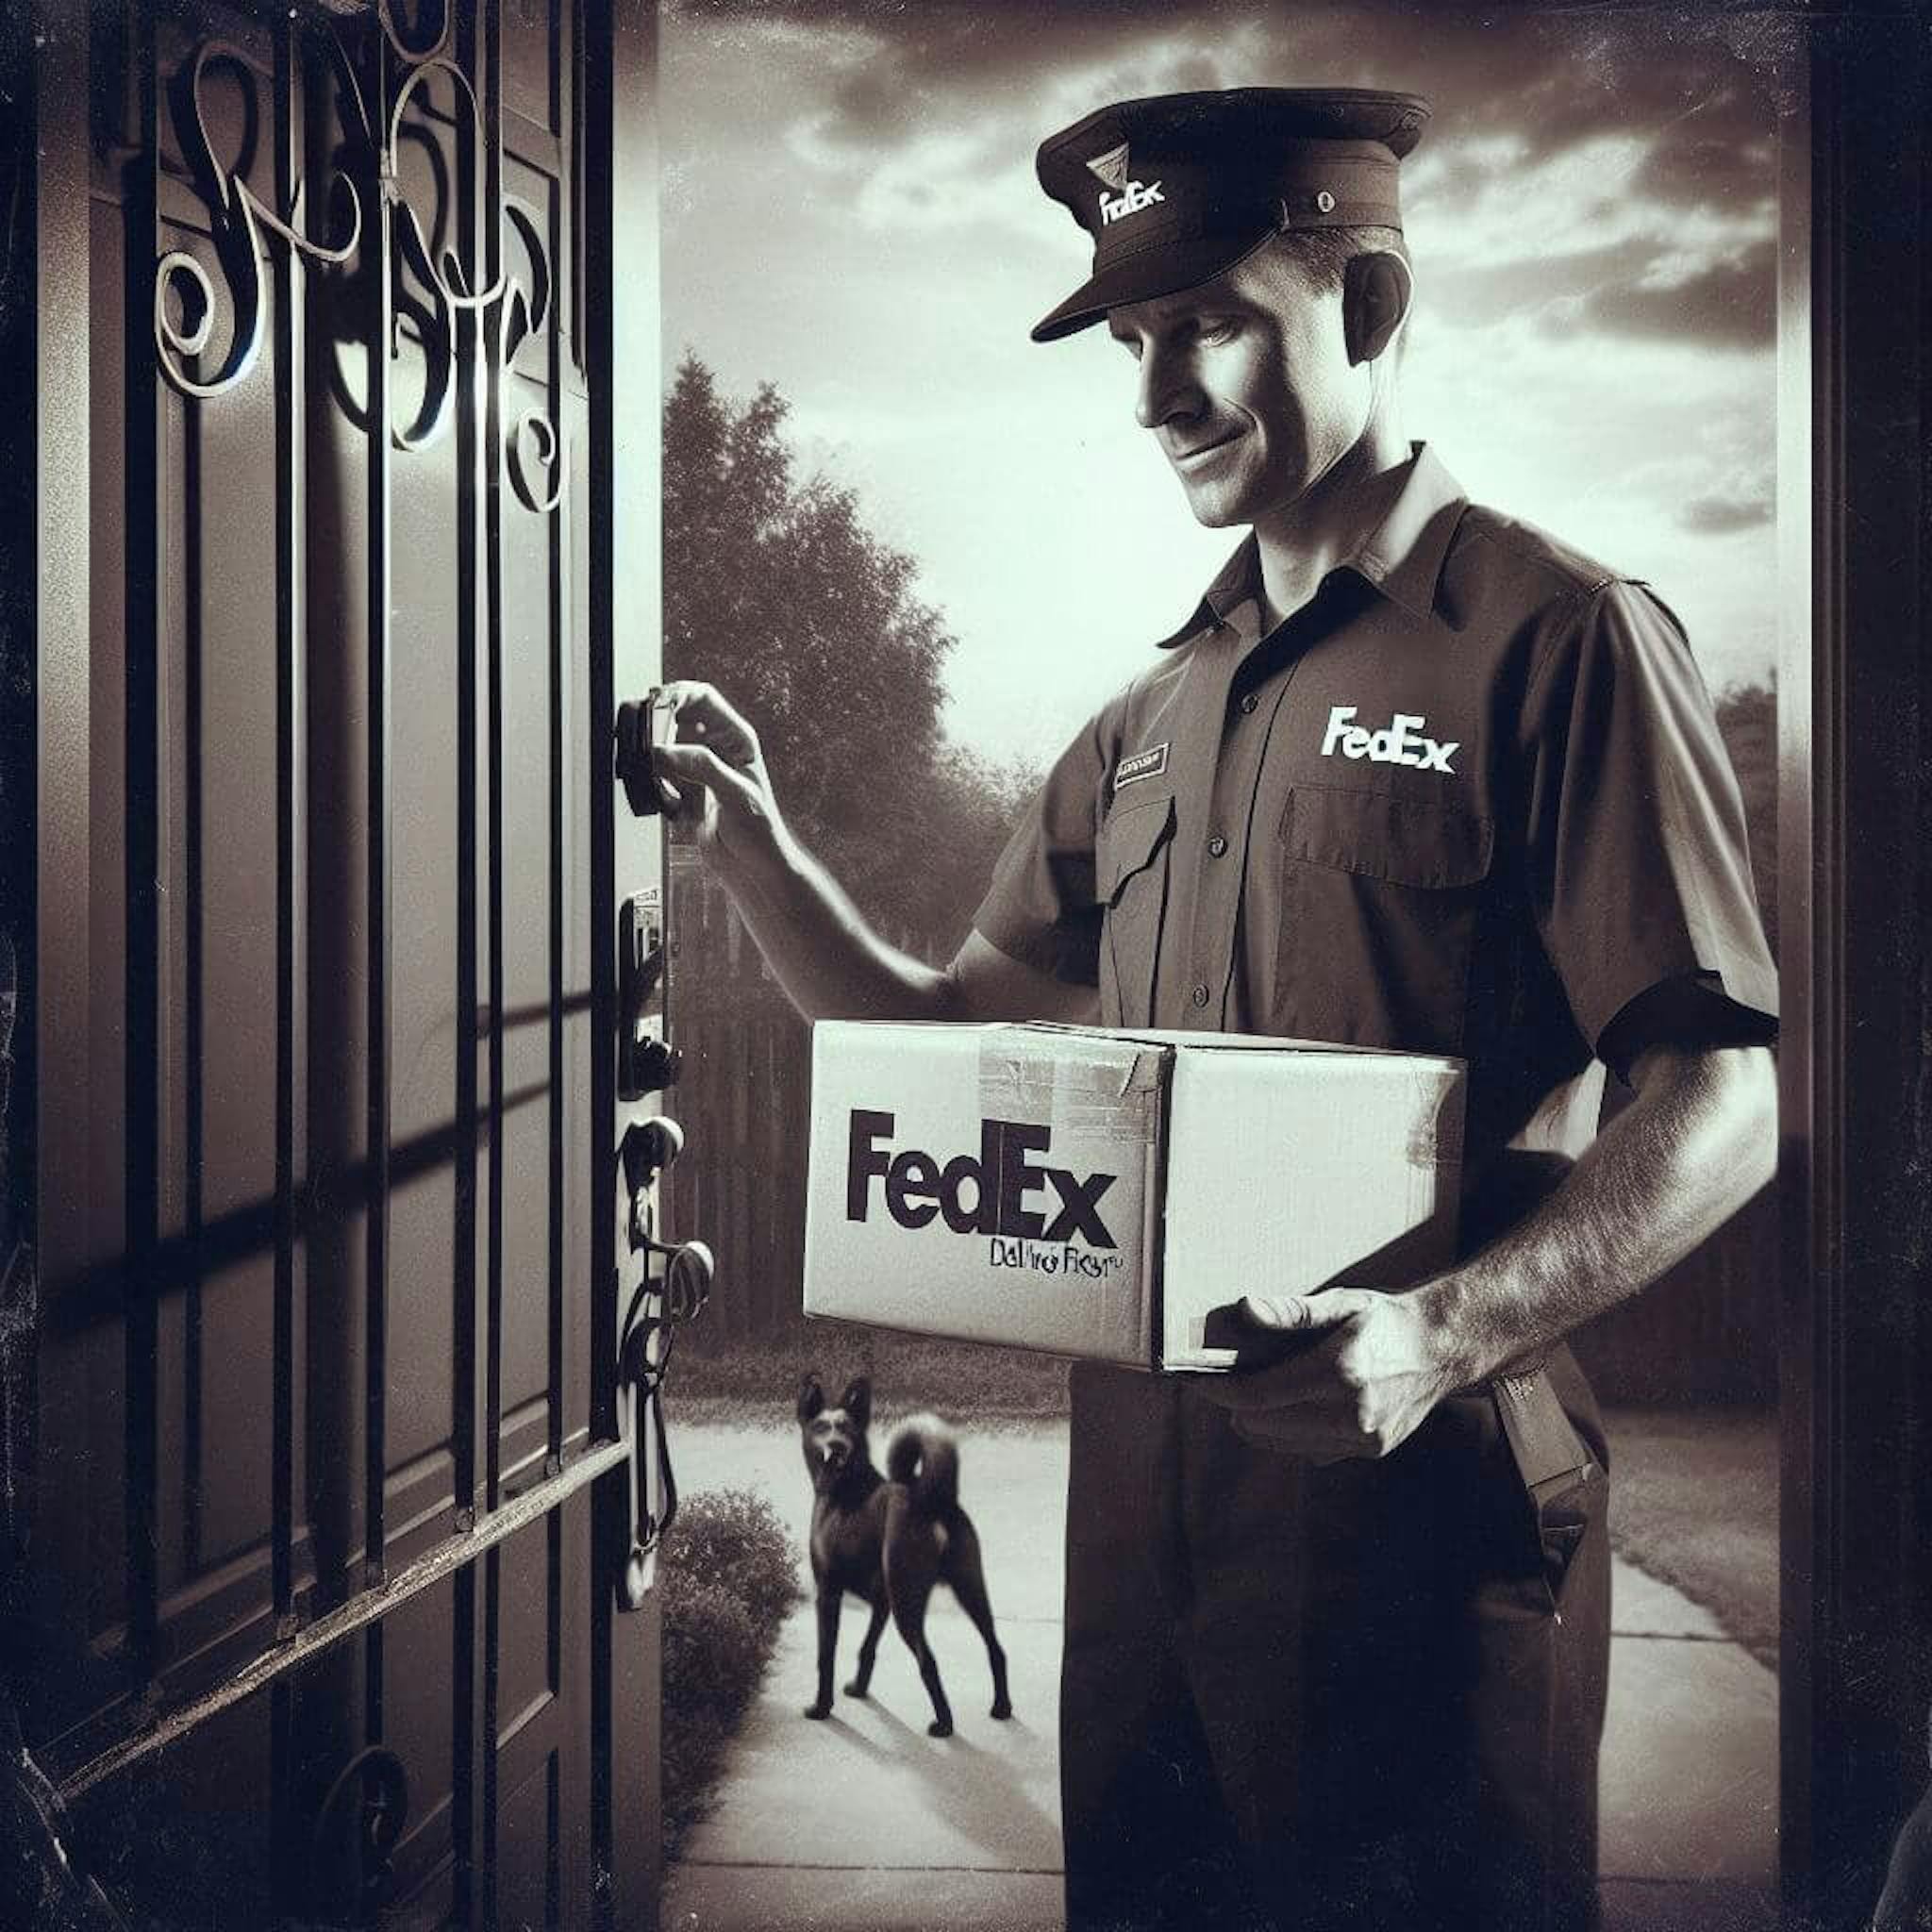 fedex delivery man stands while holding a box